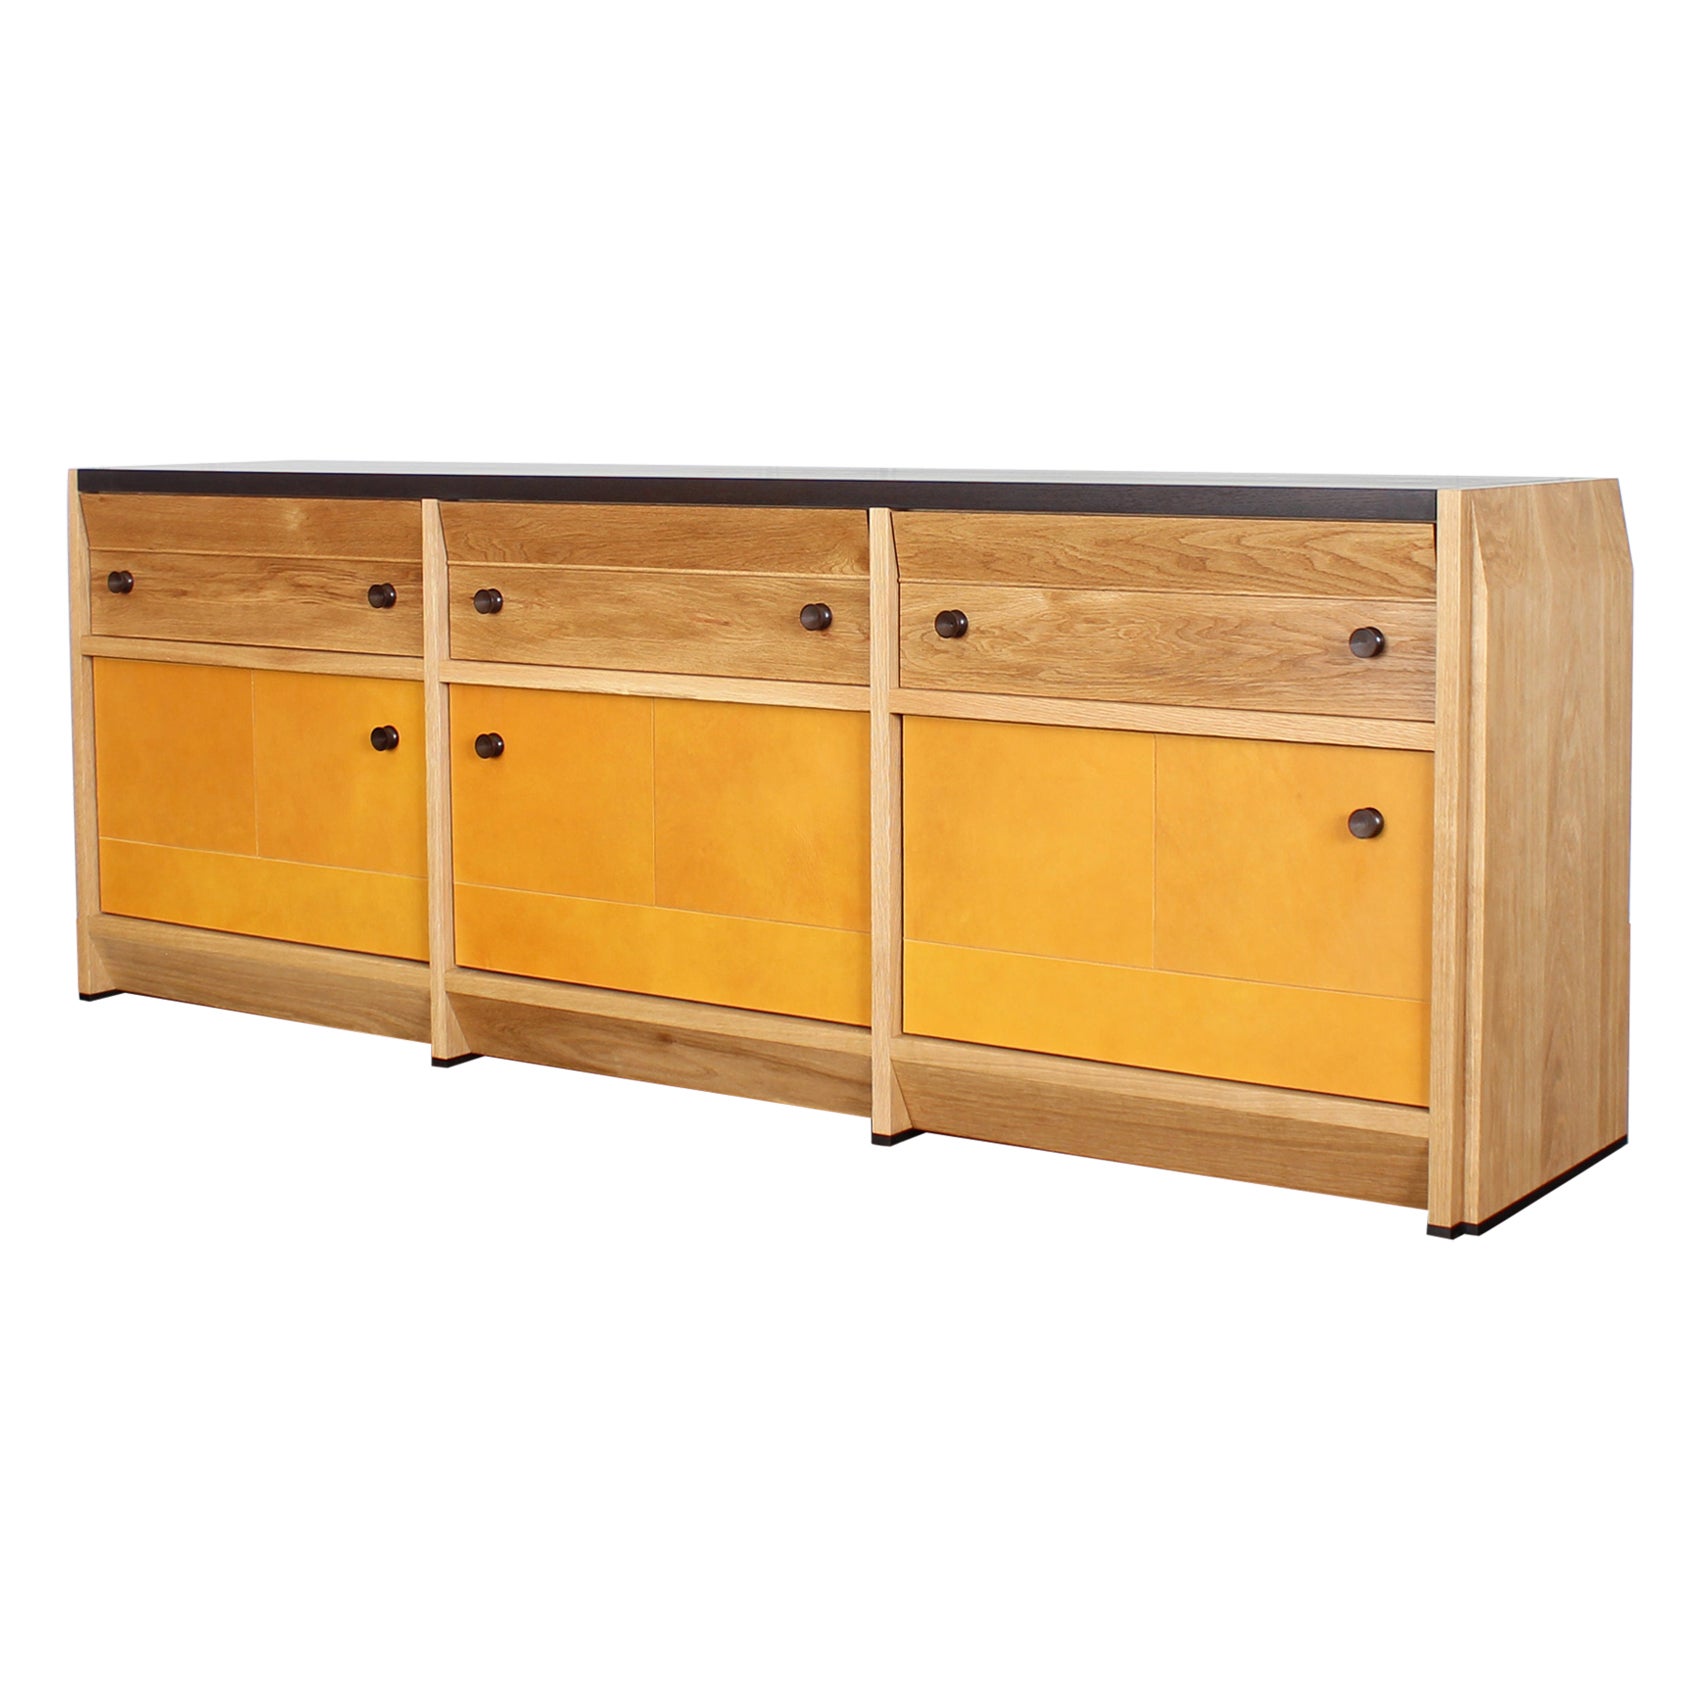 Octavia solid wood and leather credenza and sideboard by Crump and Kwash  For Sale